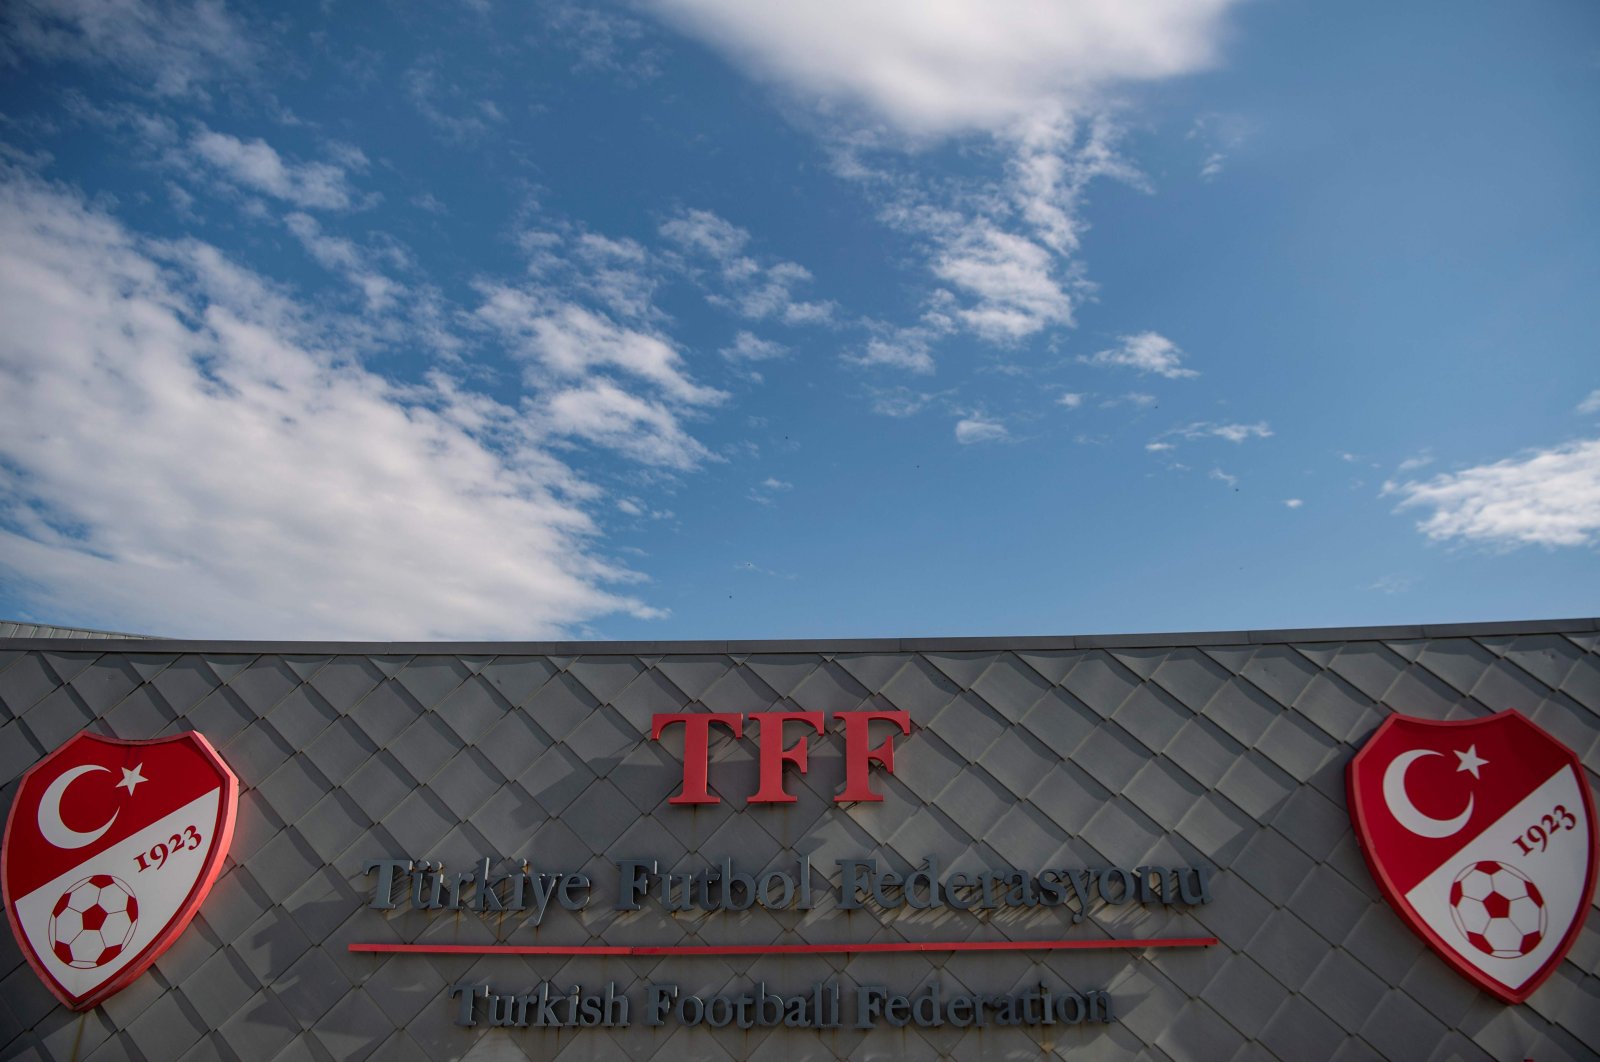 The logo of Turkish Football Federation (TFF) at the entrance of the organization's headquarters in Istanbul, Turkey, May 6, 2020. (AFP Photo)